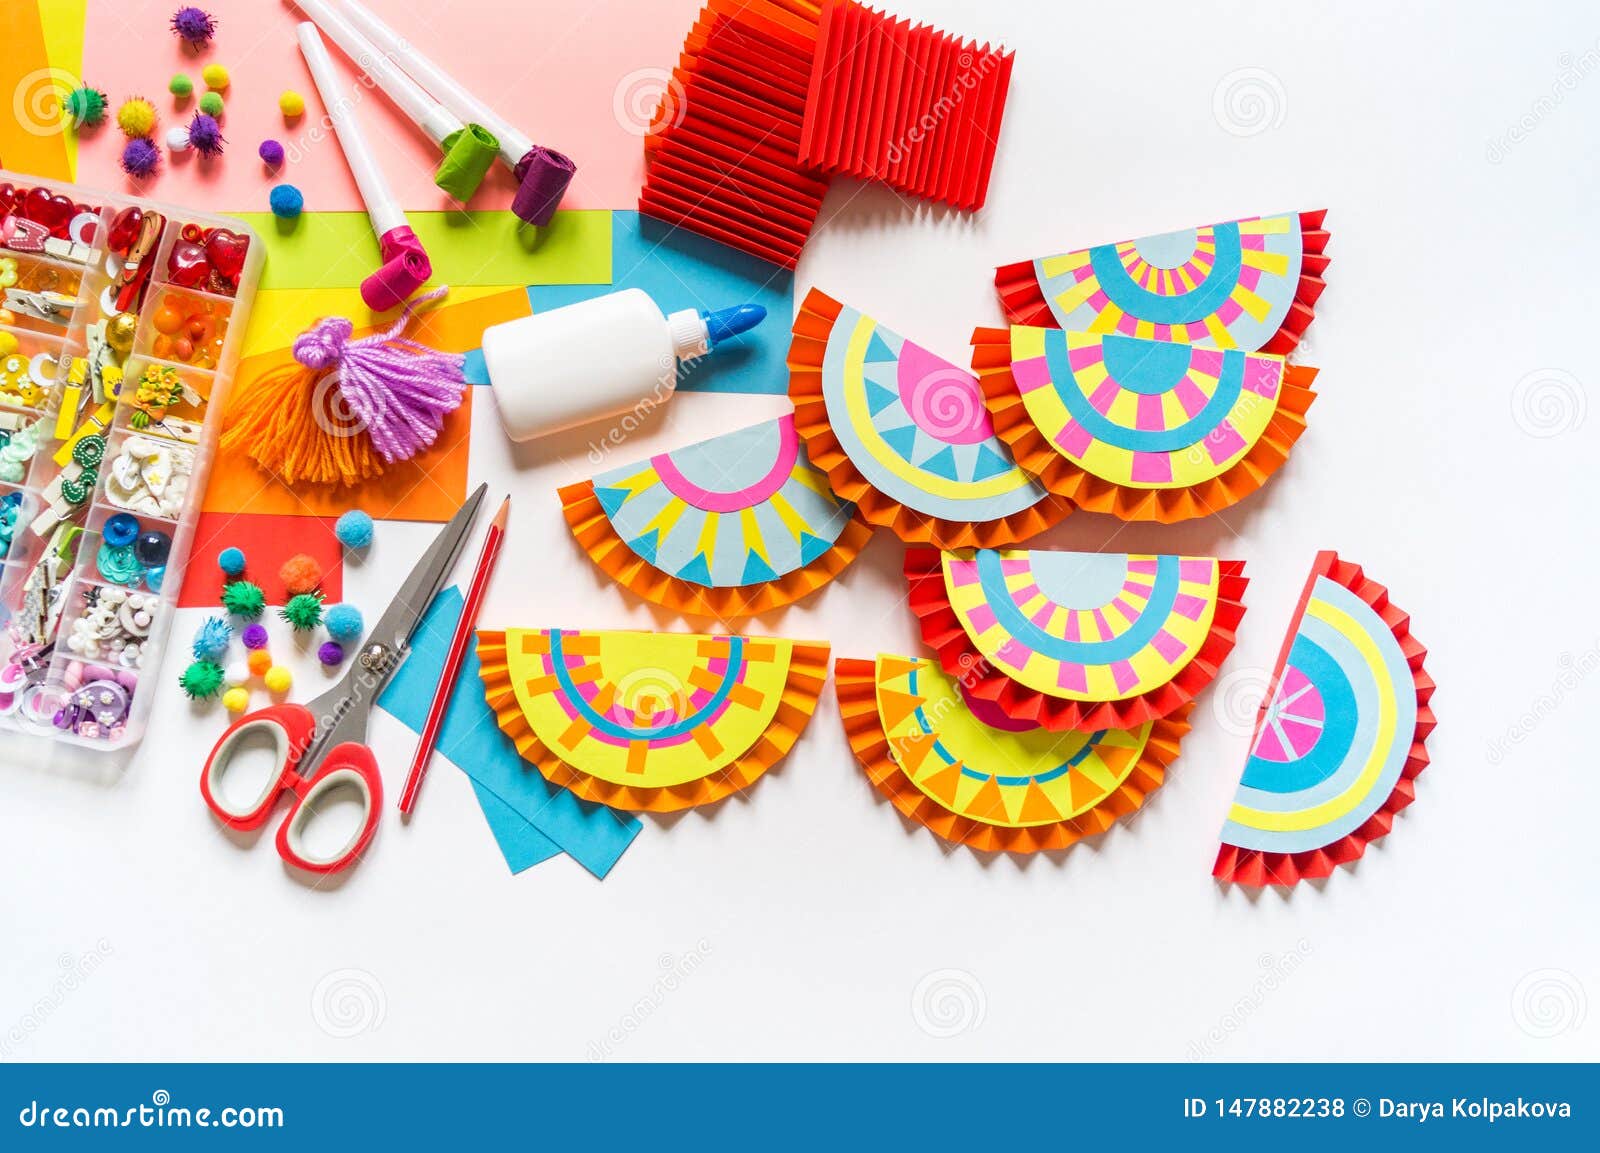 A Wall of Mexican Paper Flowers Stock Image - Image of paper, arts:  131276603